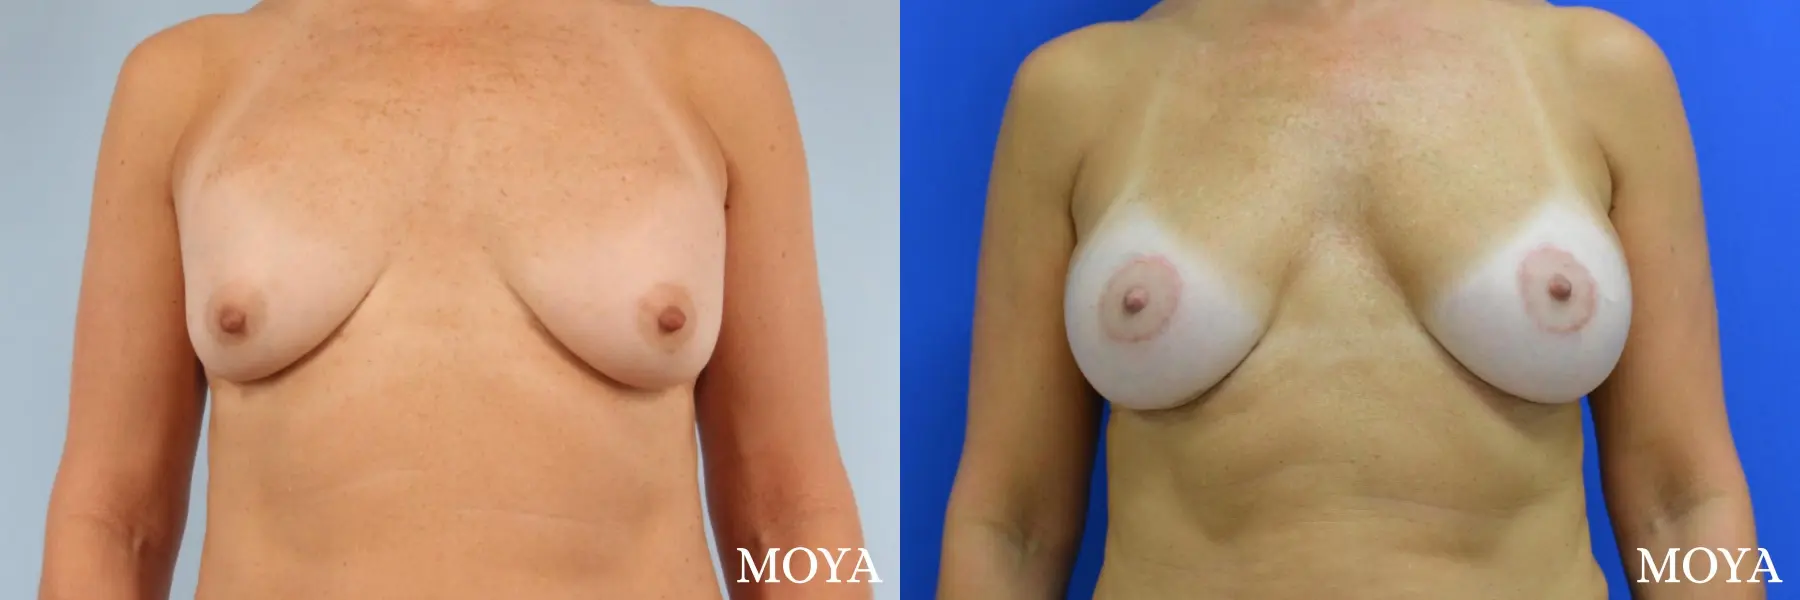 Breast Implant Exchange: Patient 5 - Before and After 1